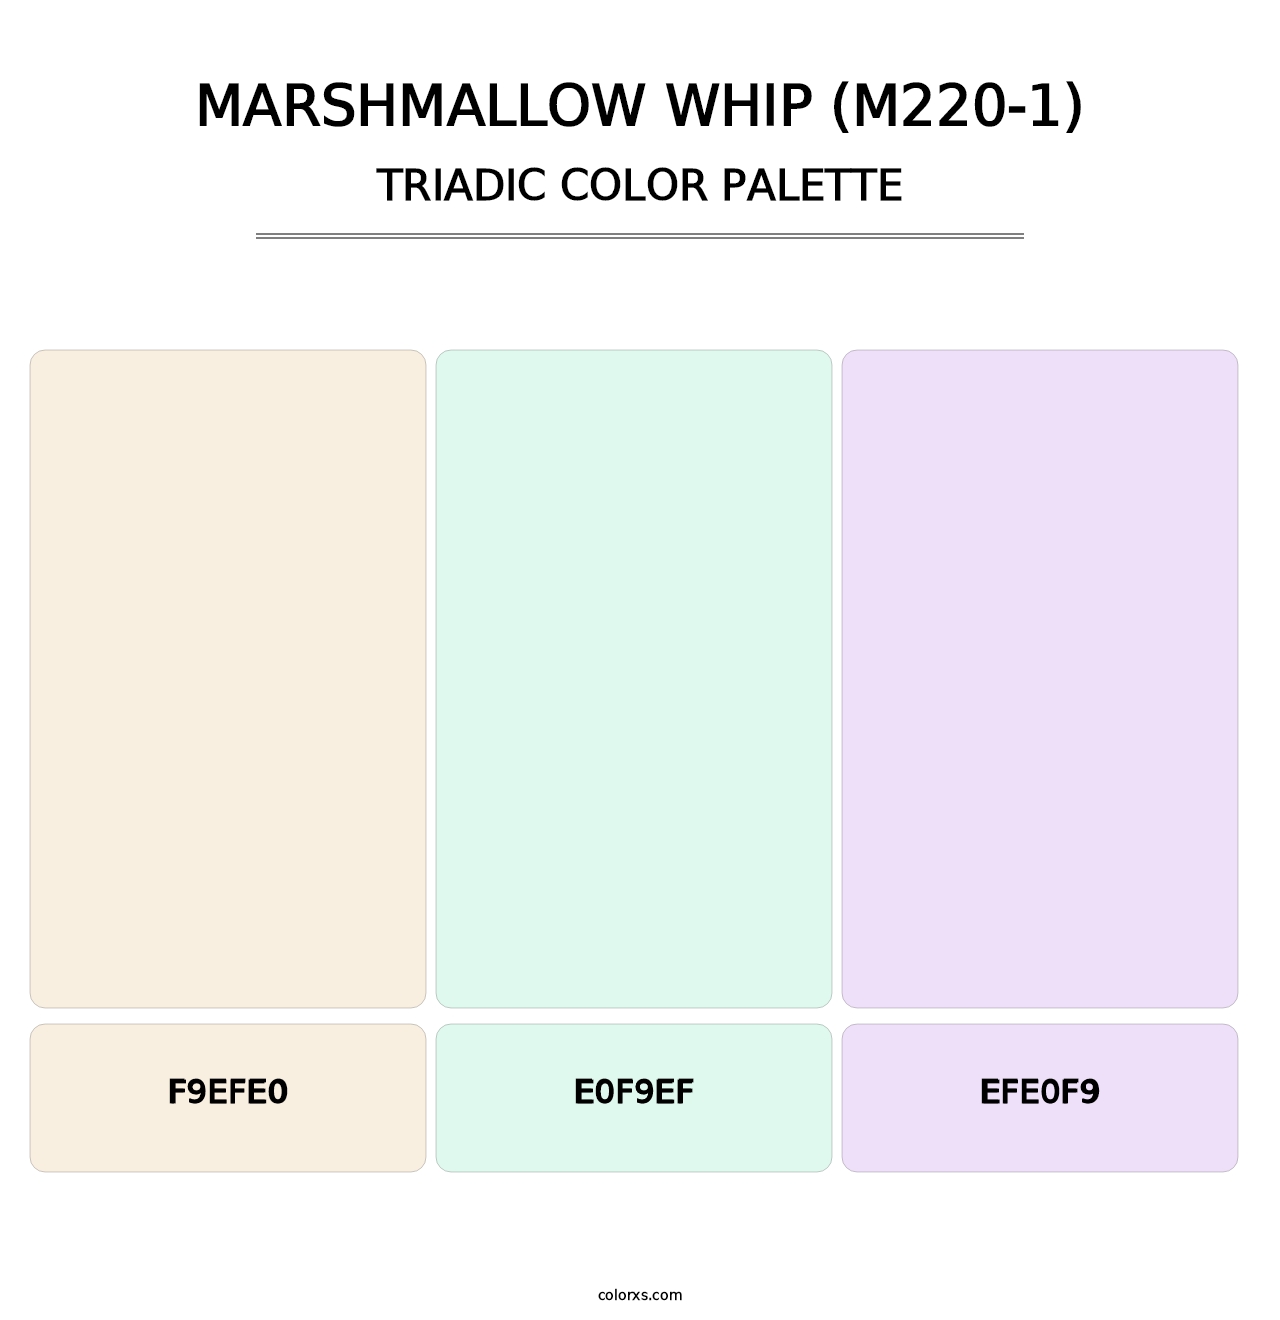 Marshmallow Whip (M220-1) - Triadic Color Palette